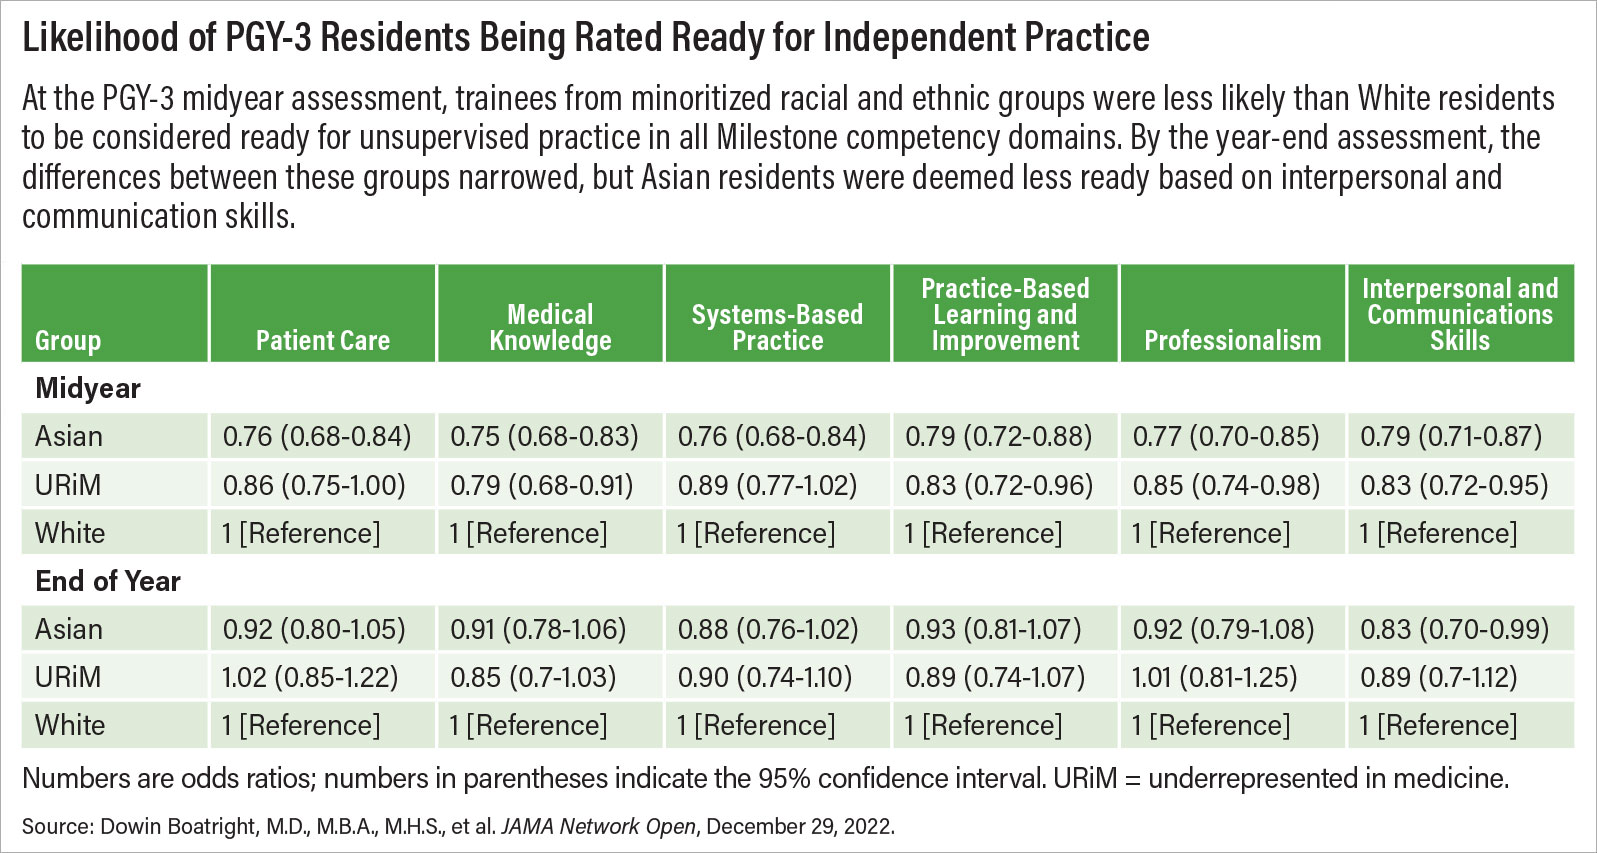 Table showing the Likelihood of PGY-3 Residents Being Rated Ready for Independent Practice